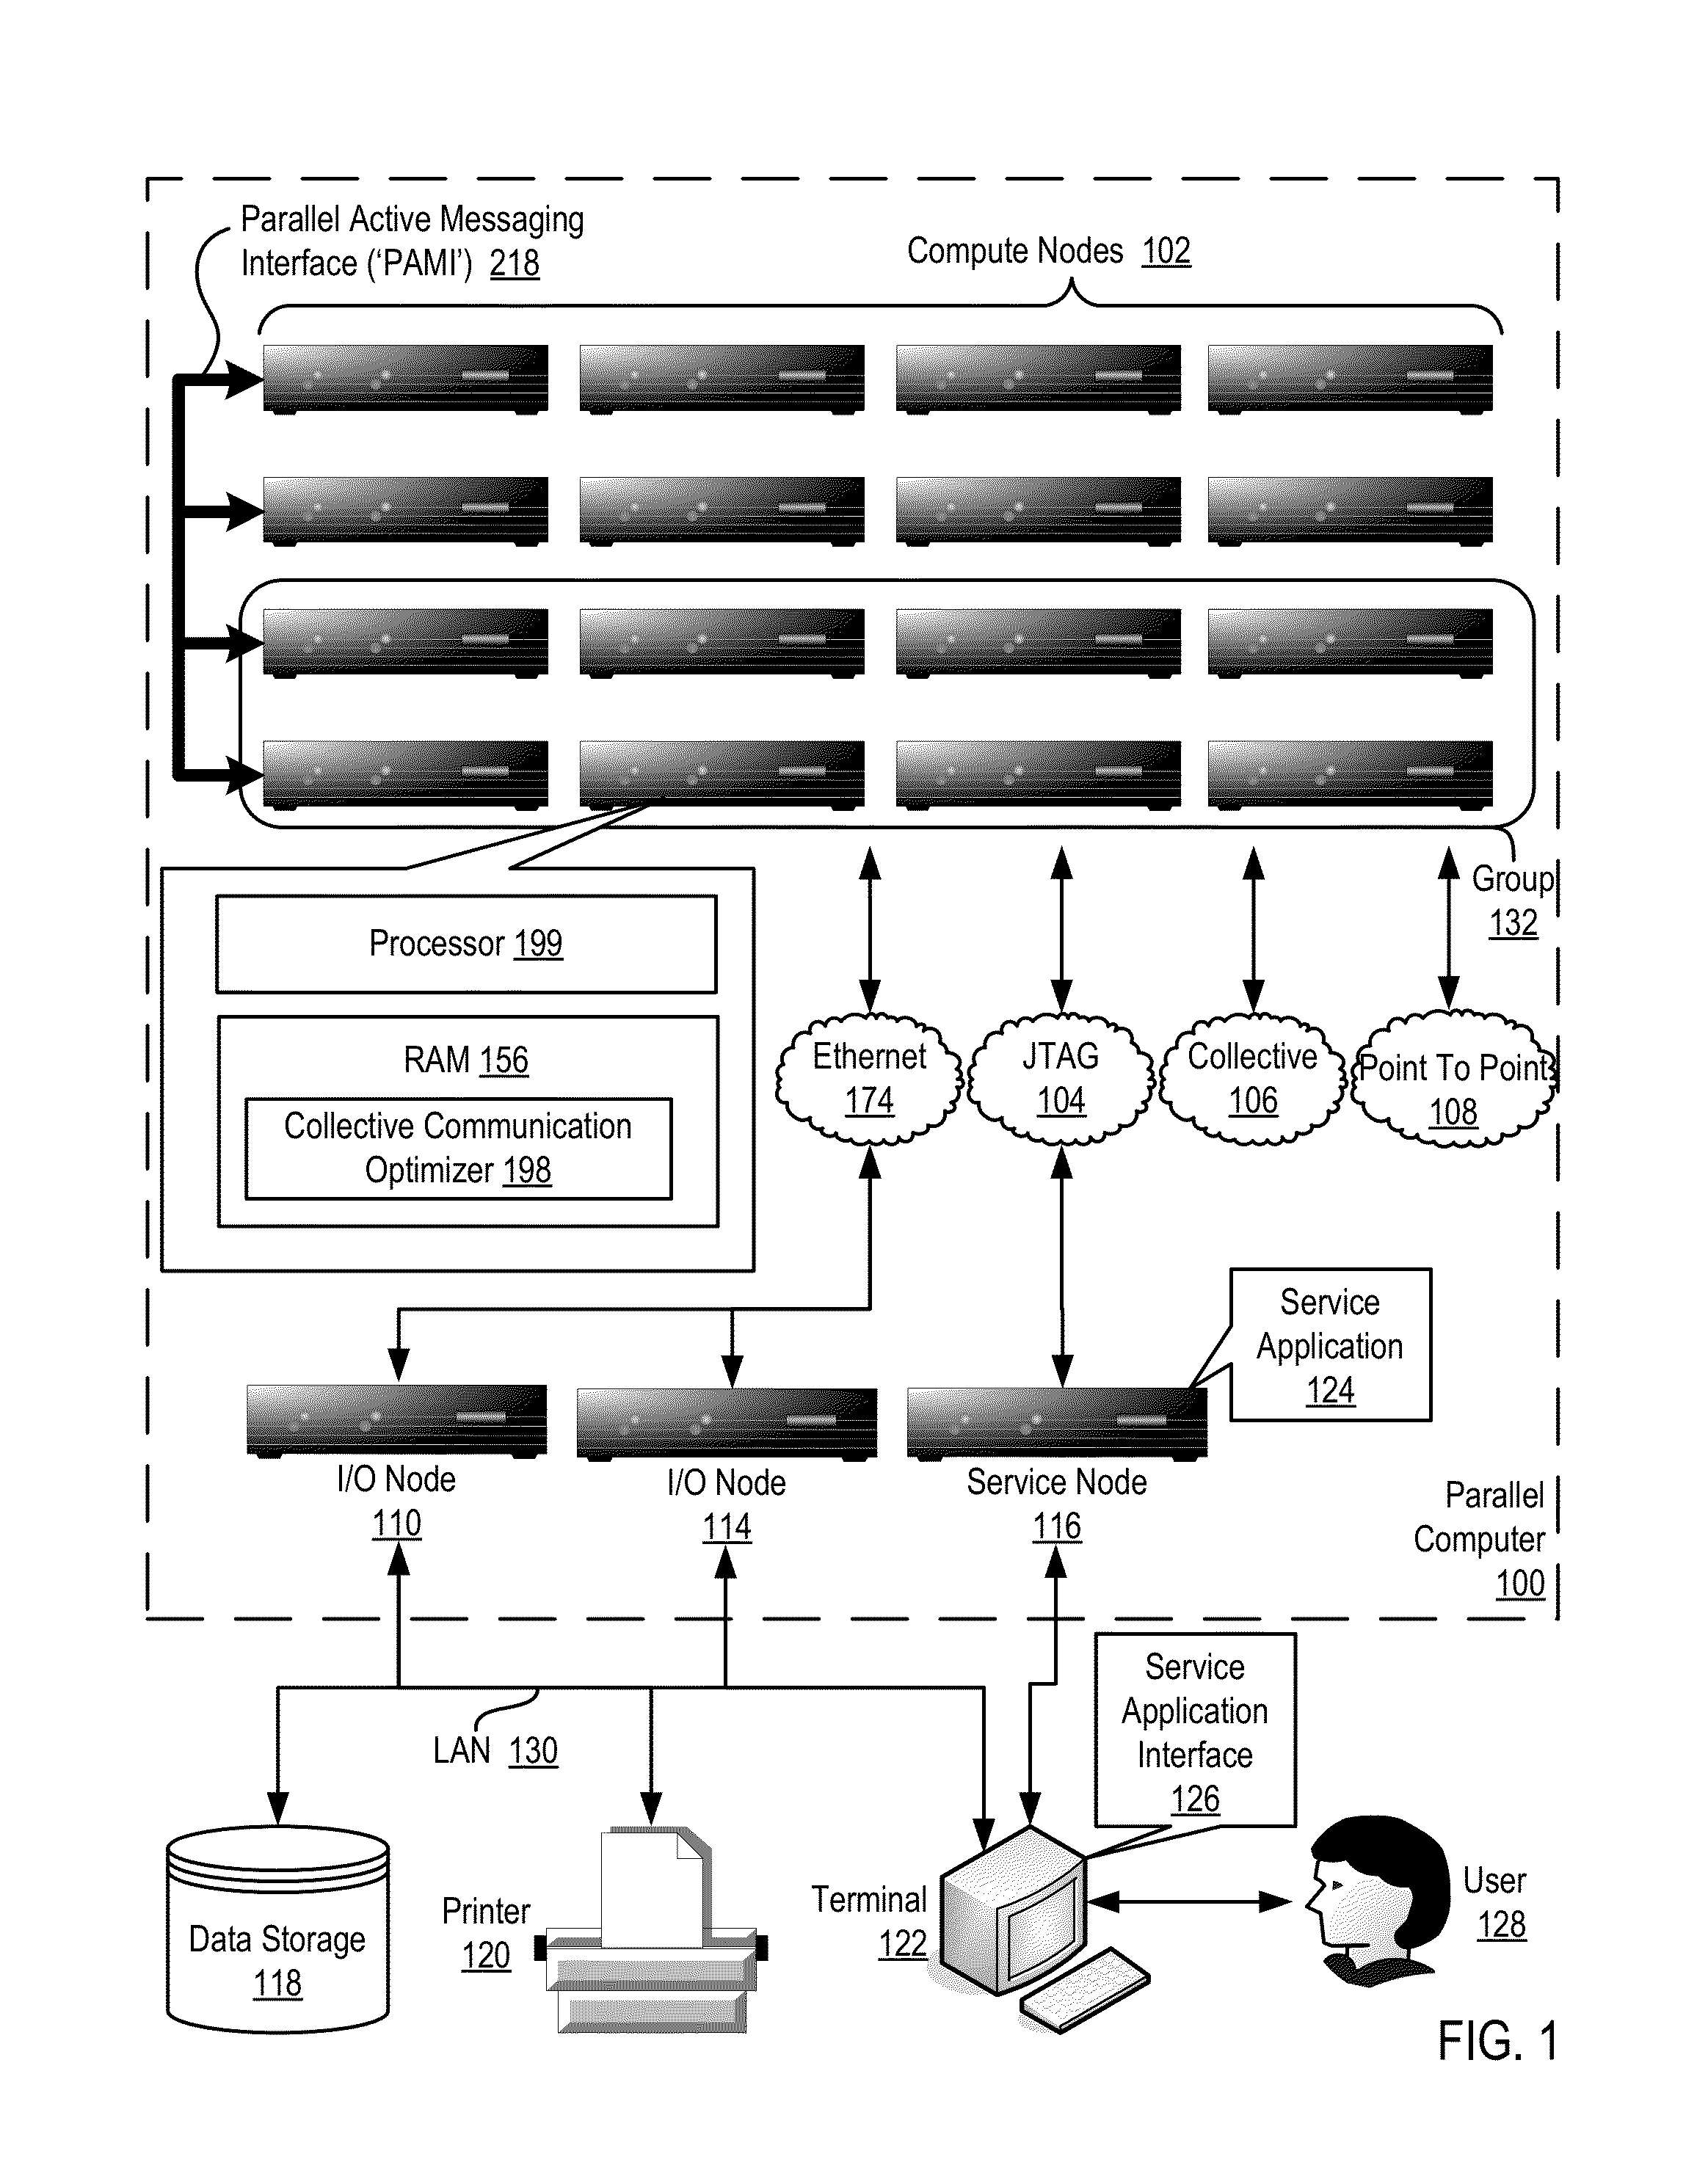 Optimizing collective communications within a parallel computer